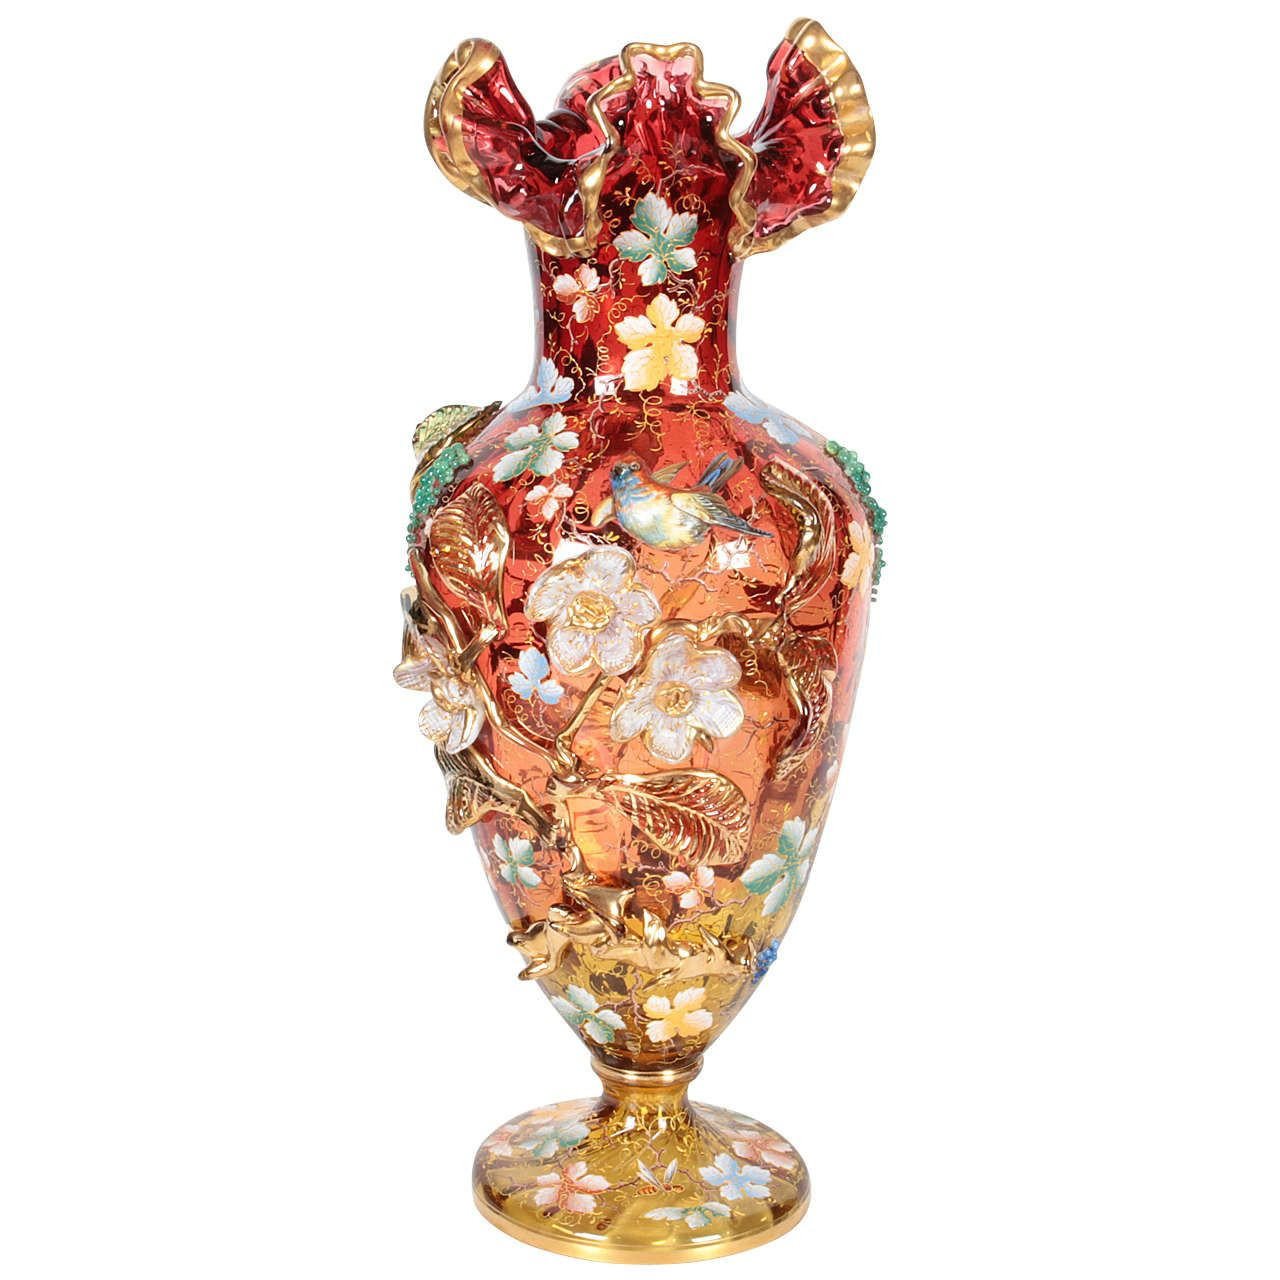 16 Unique Glass Bird Vase 2024 free download glass bird vase of moser glass amberina red vase with raised flowers leaves jewels for moser glass amberina red vase with raised flowers leaves jewels and bird from a unique collection of an